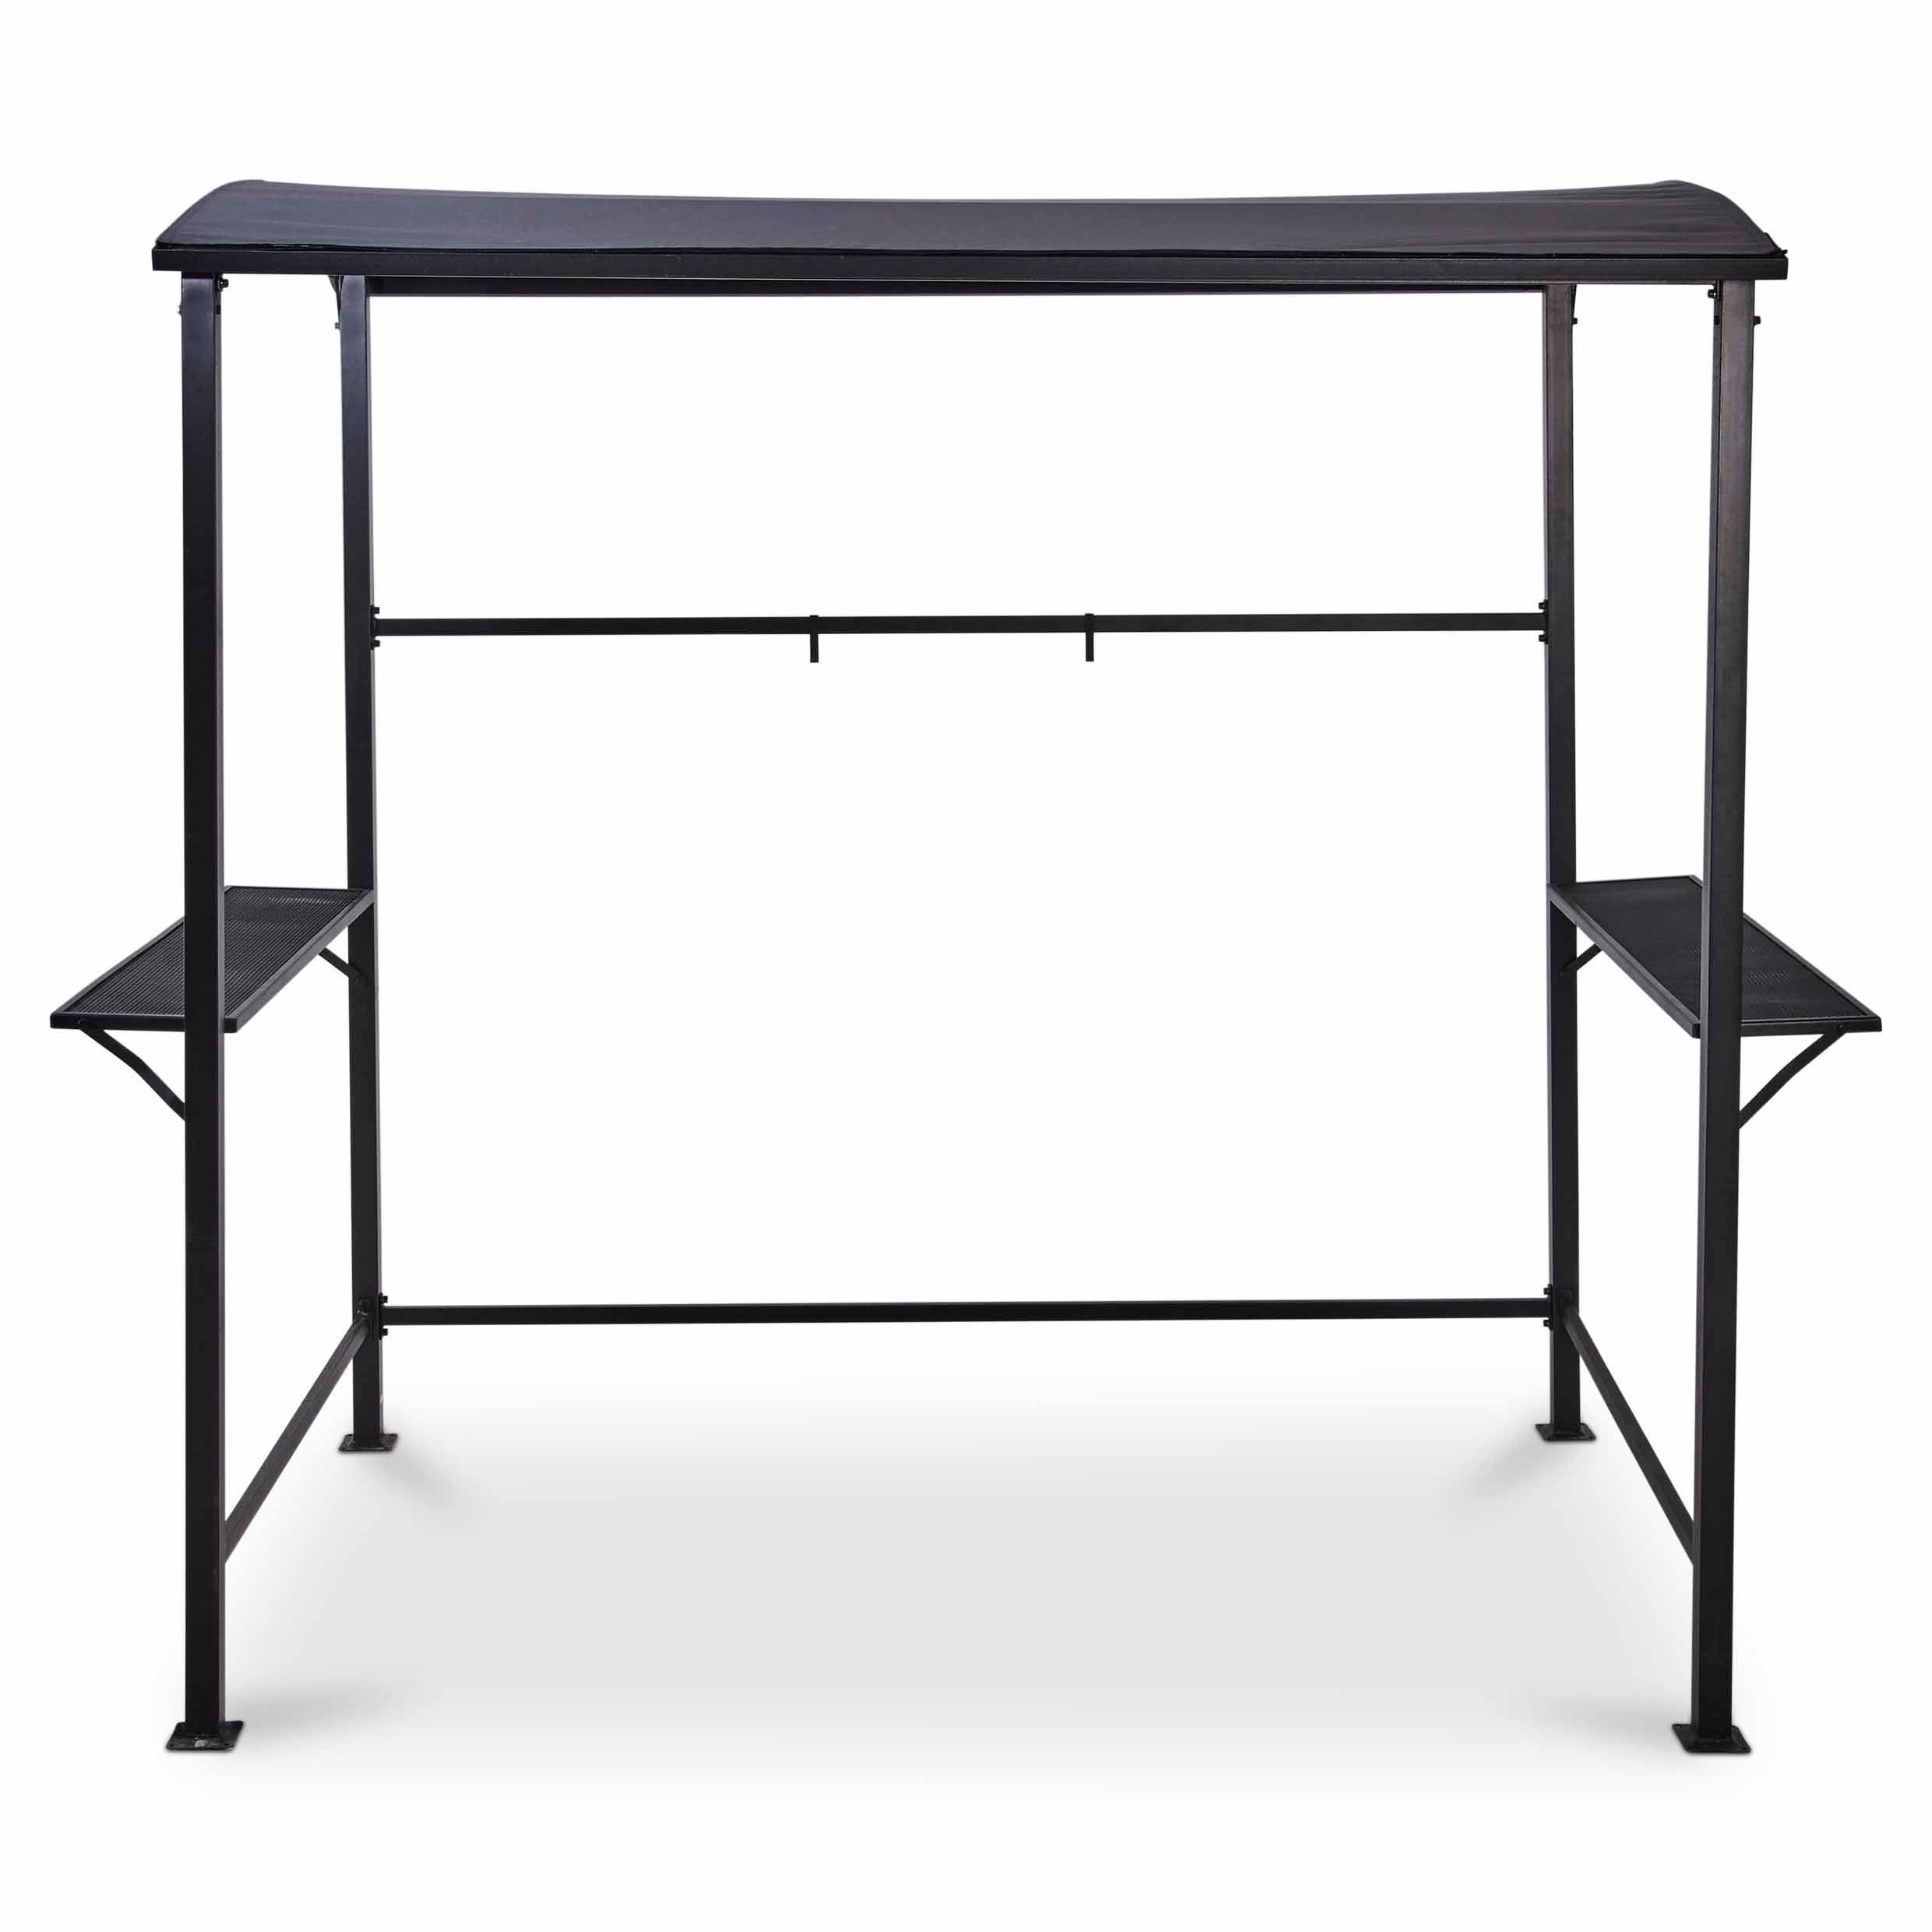 Blooma Coburg Grey Steel Barbecue shelter 2.1m(H) 2.47m(W)